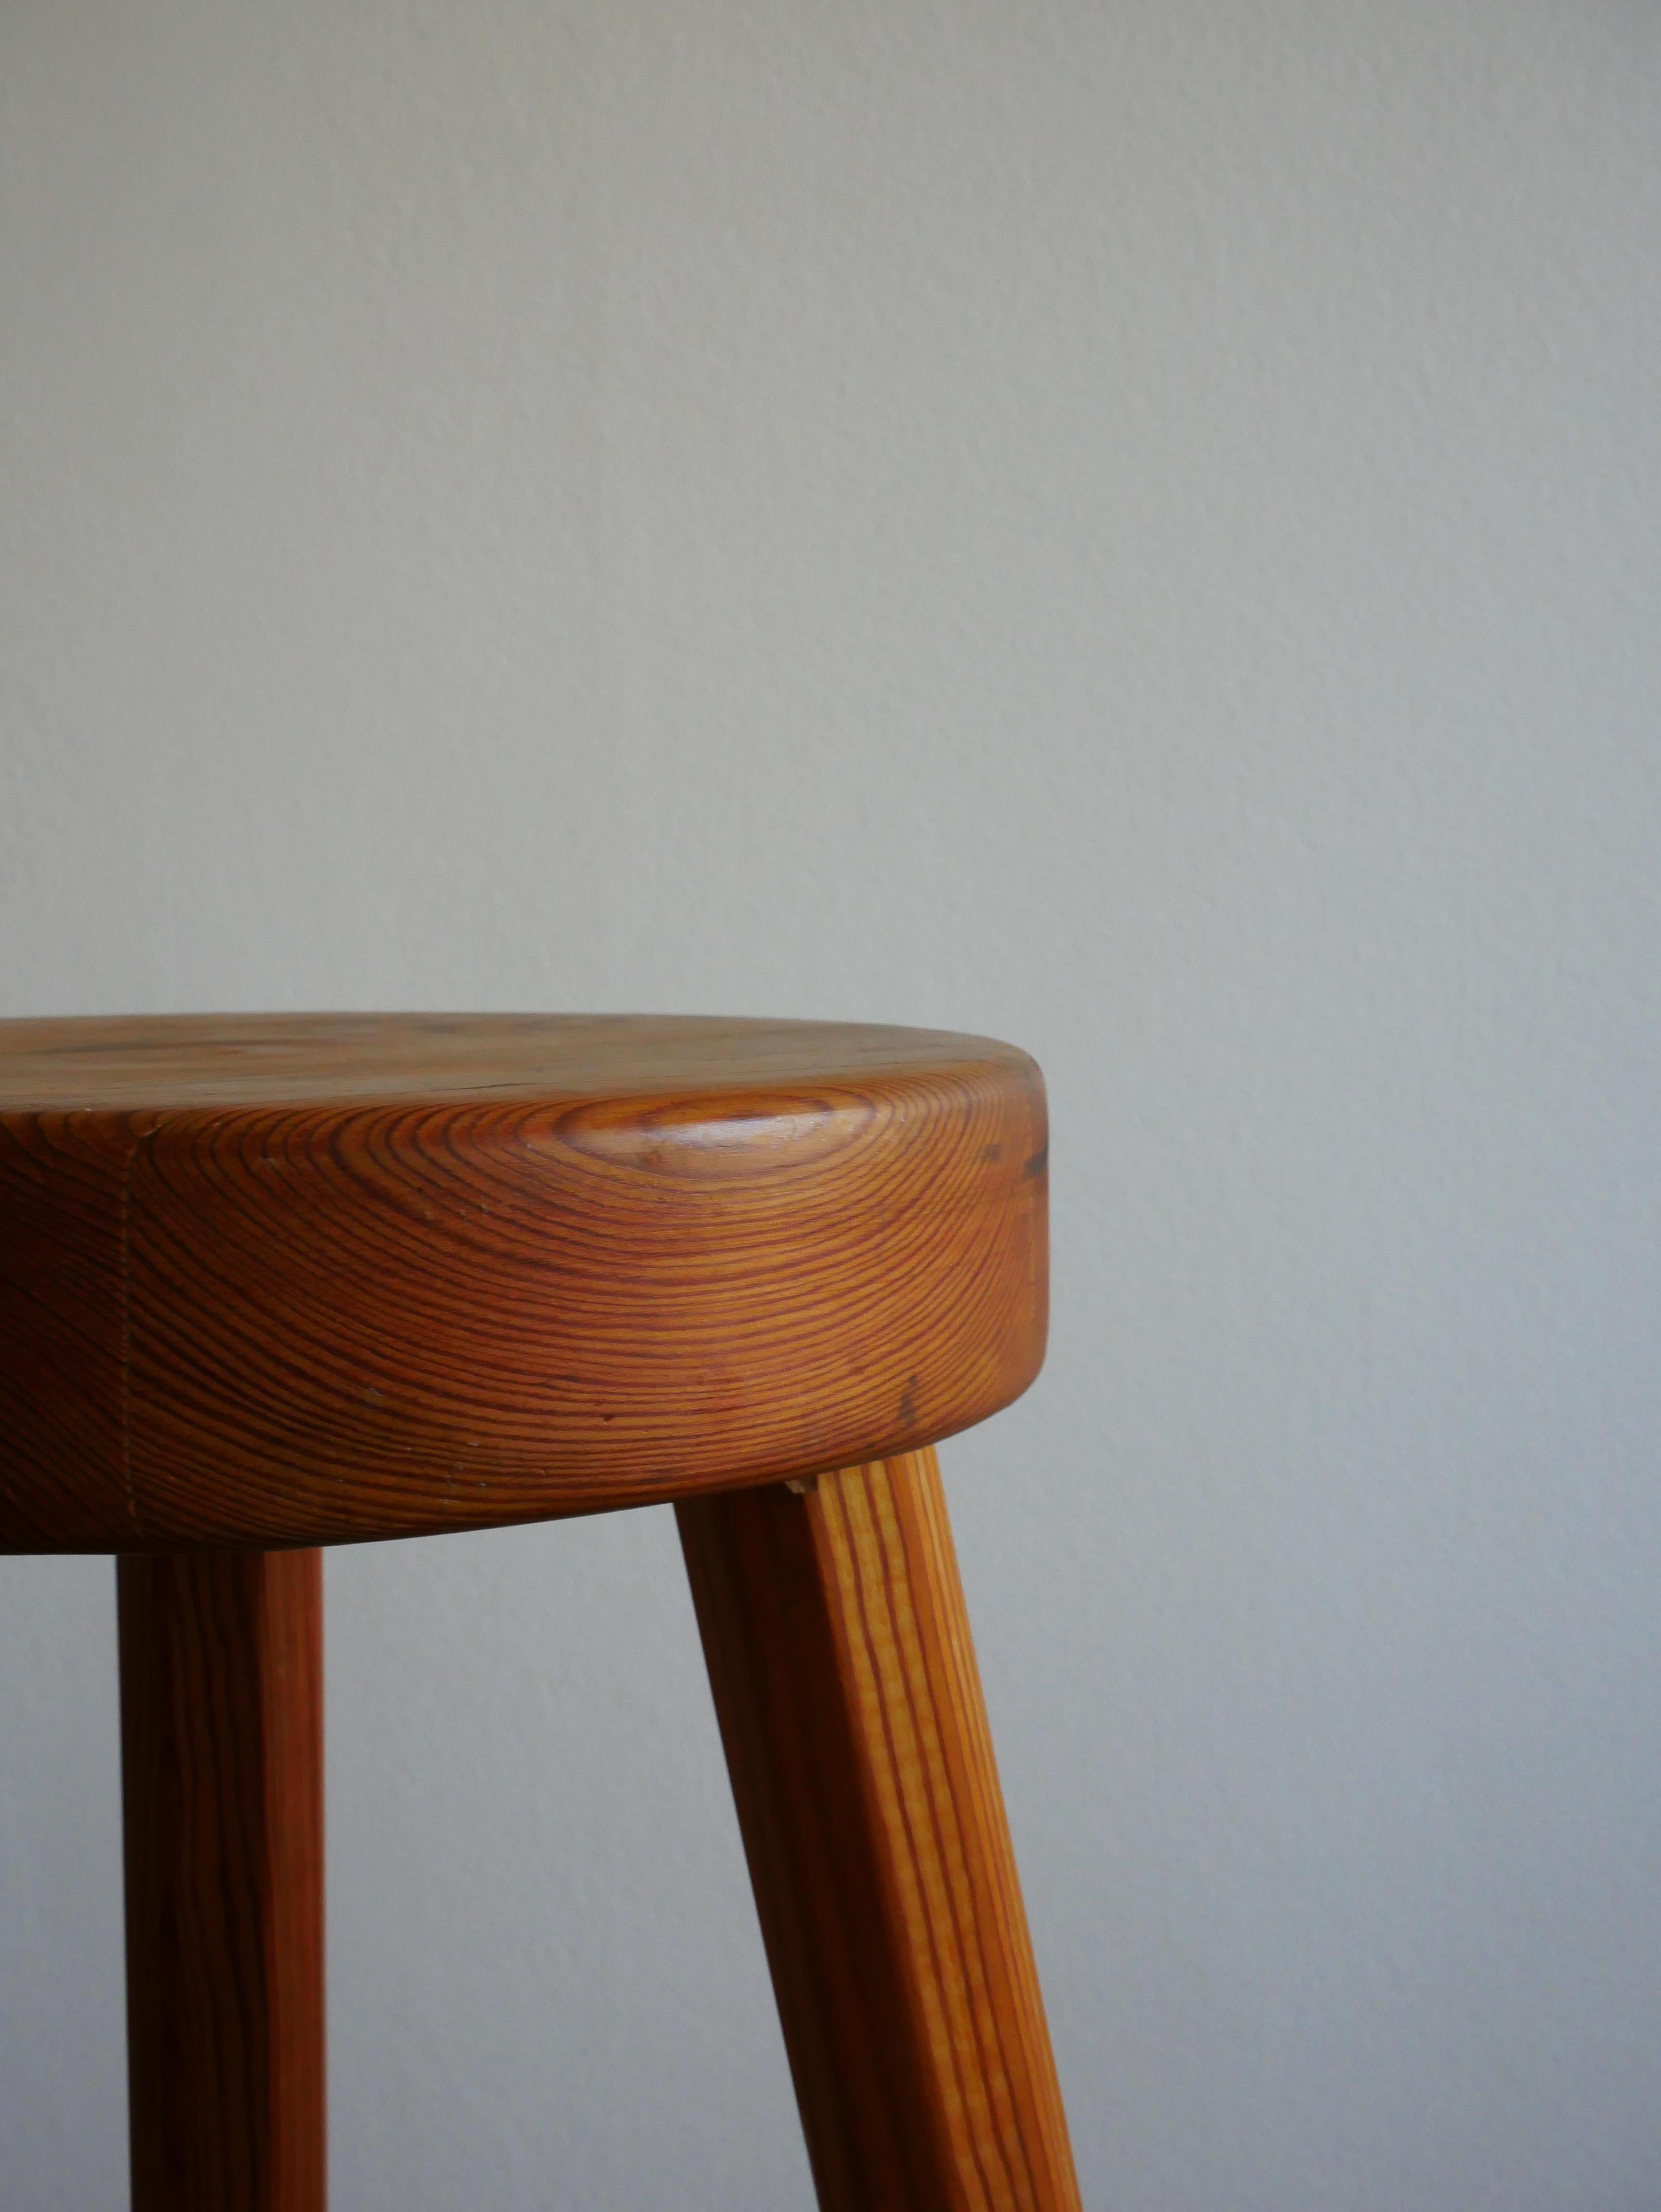 Three Legged Swedish Solid Pine Stool In Good Condition For Sale In Farsta, SE